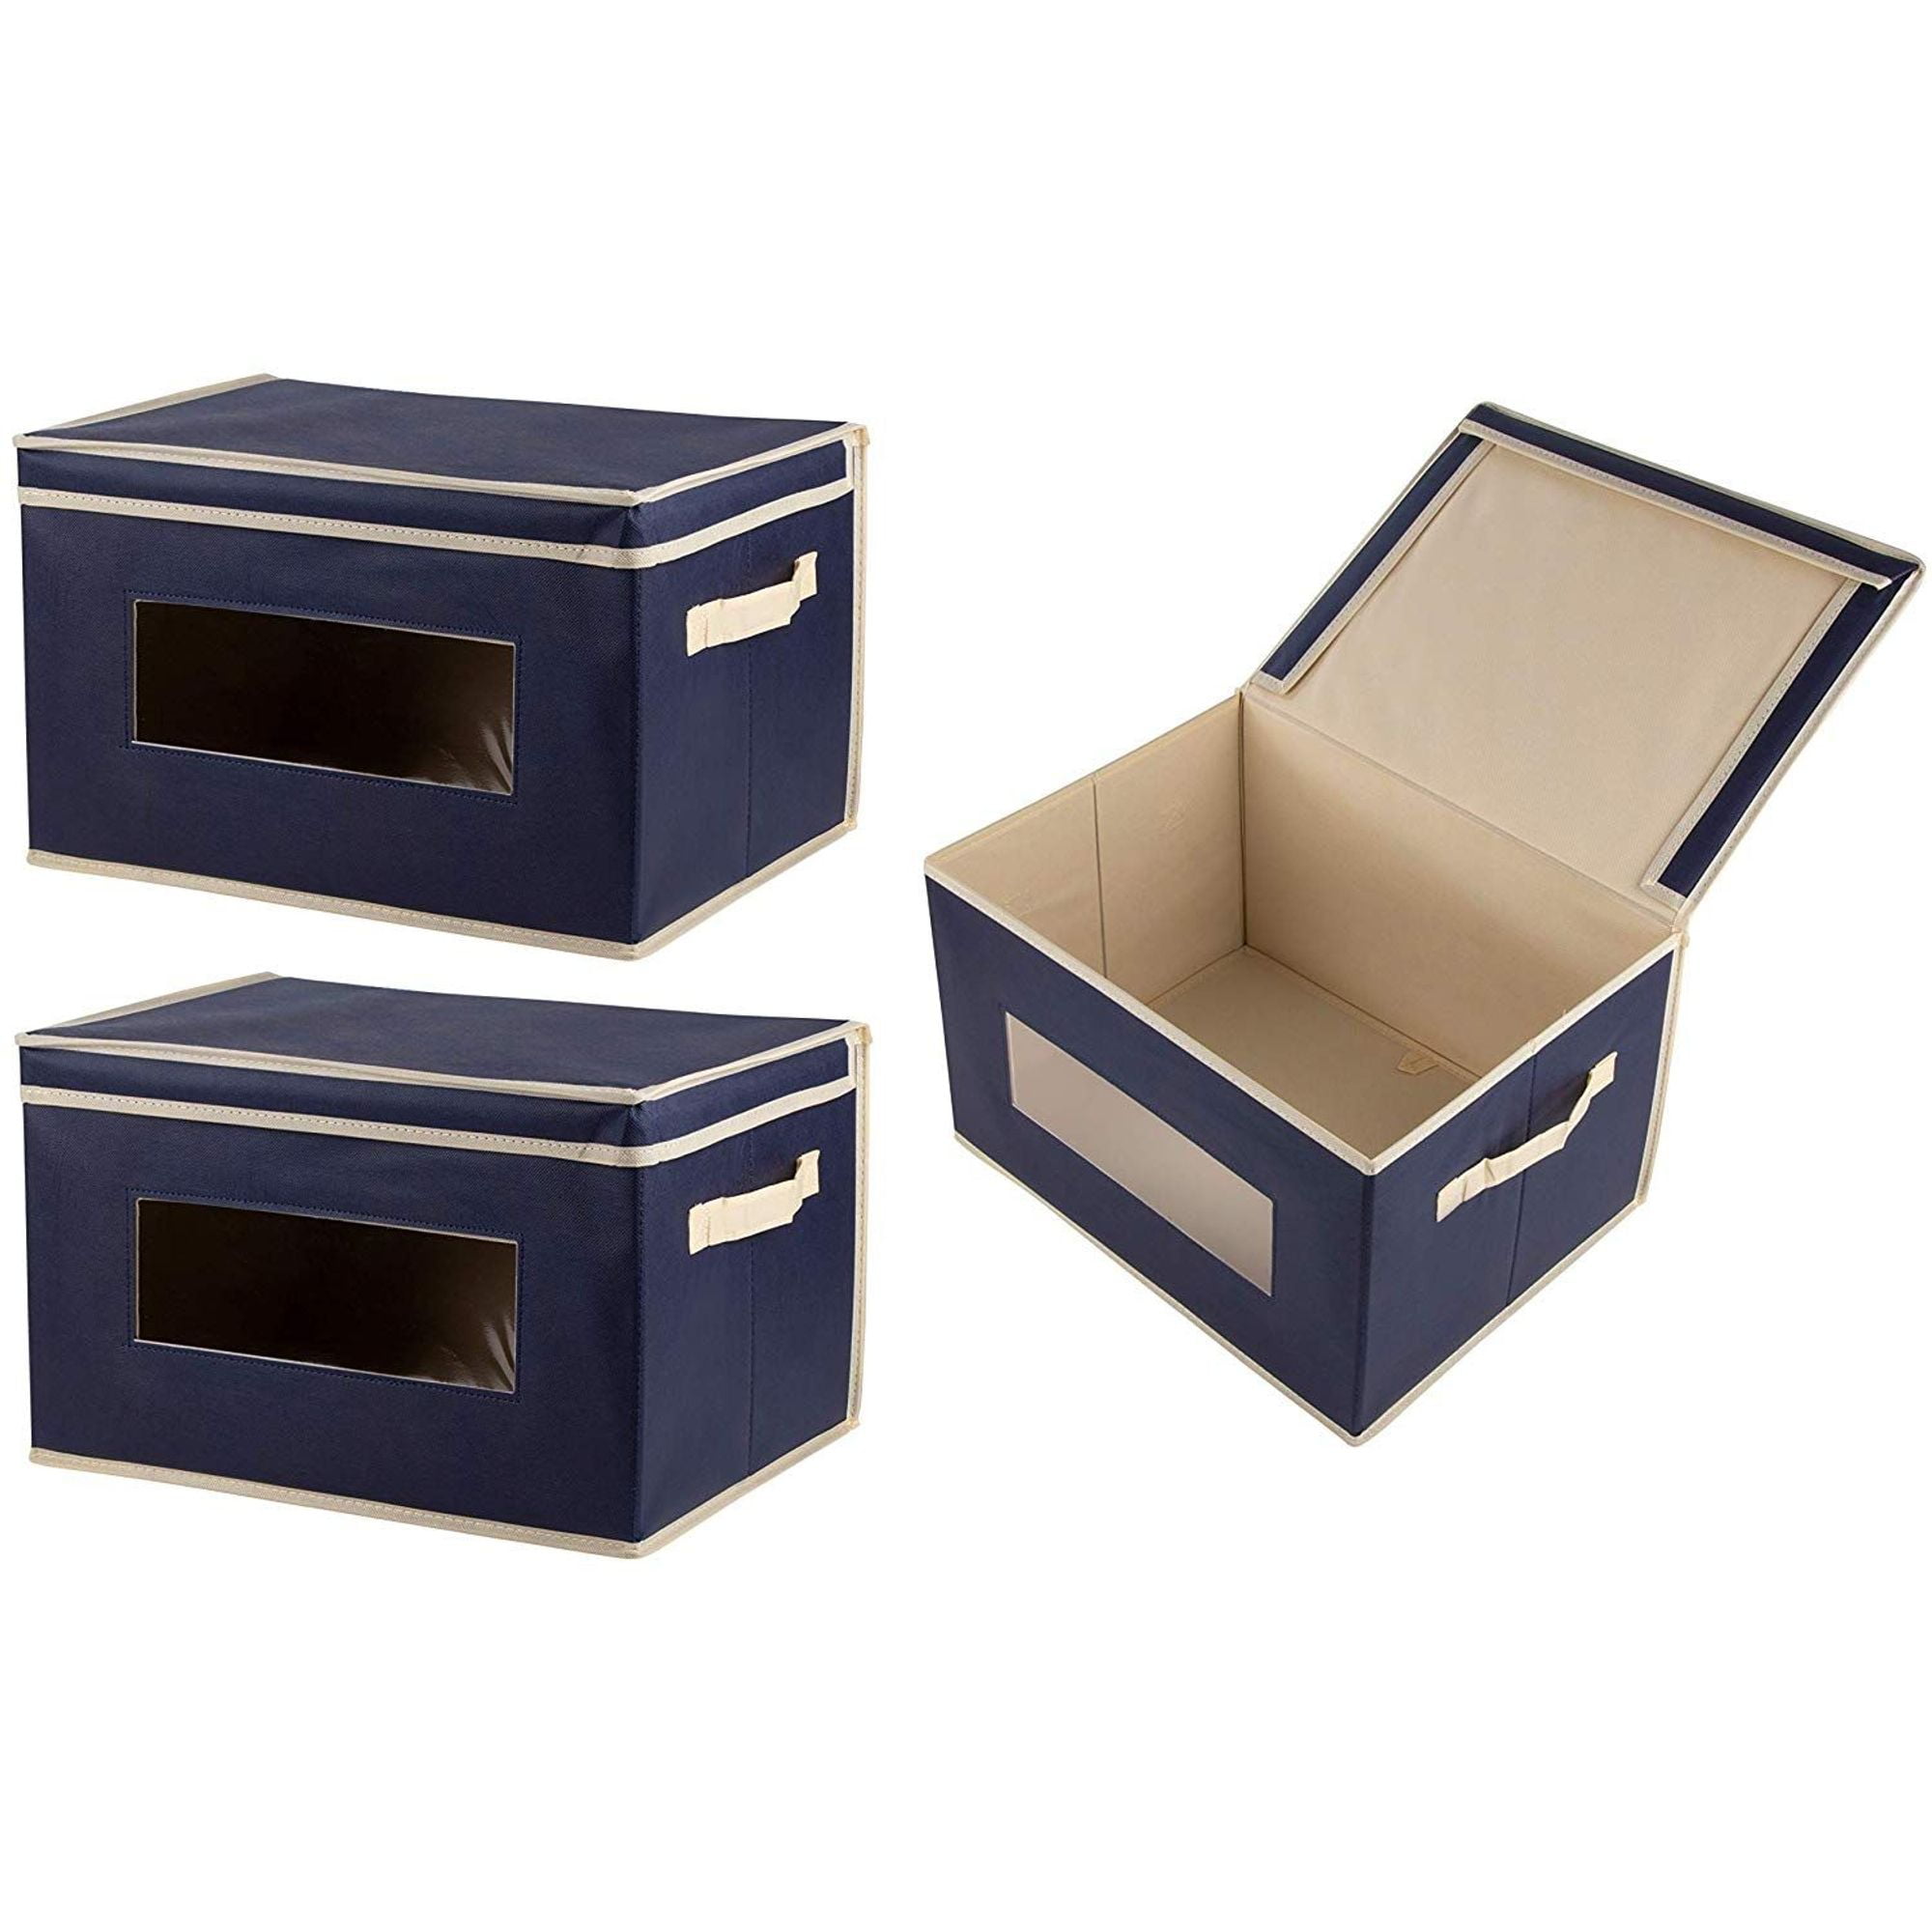 decorative fabric storage boxes with lids